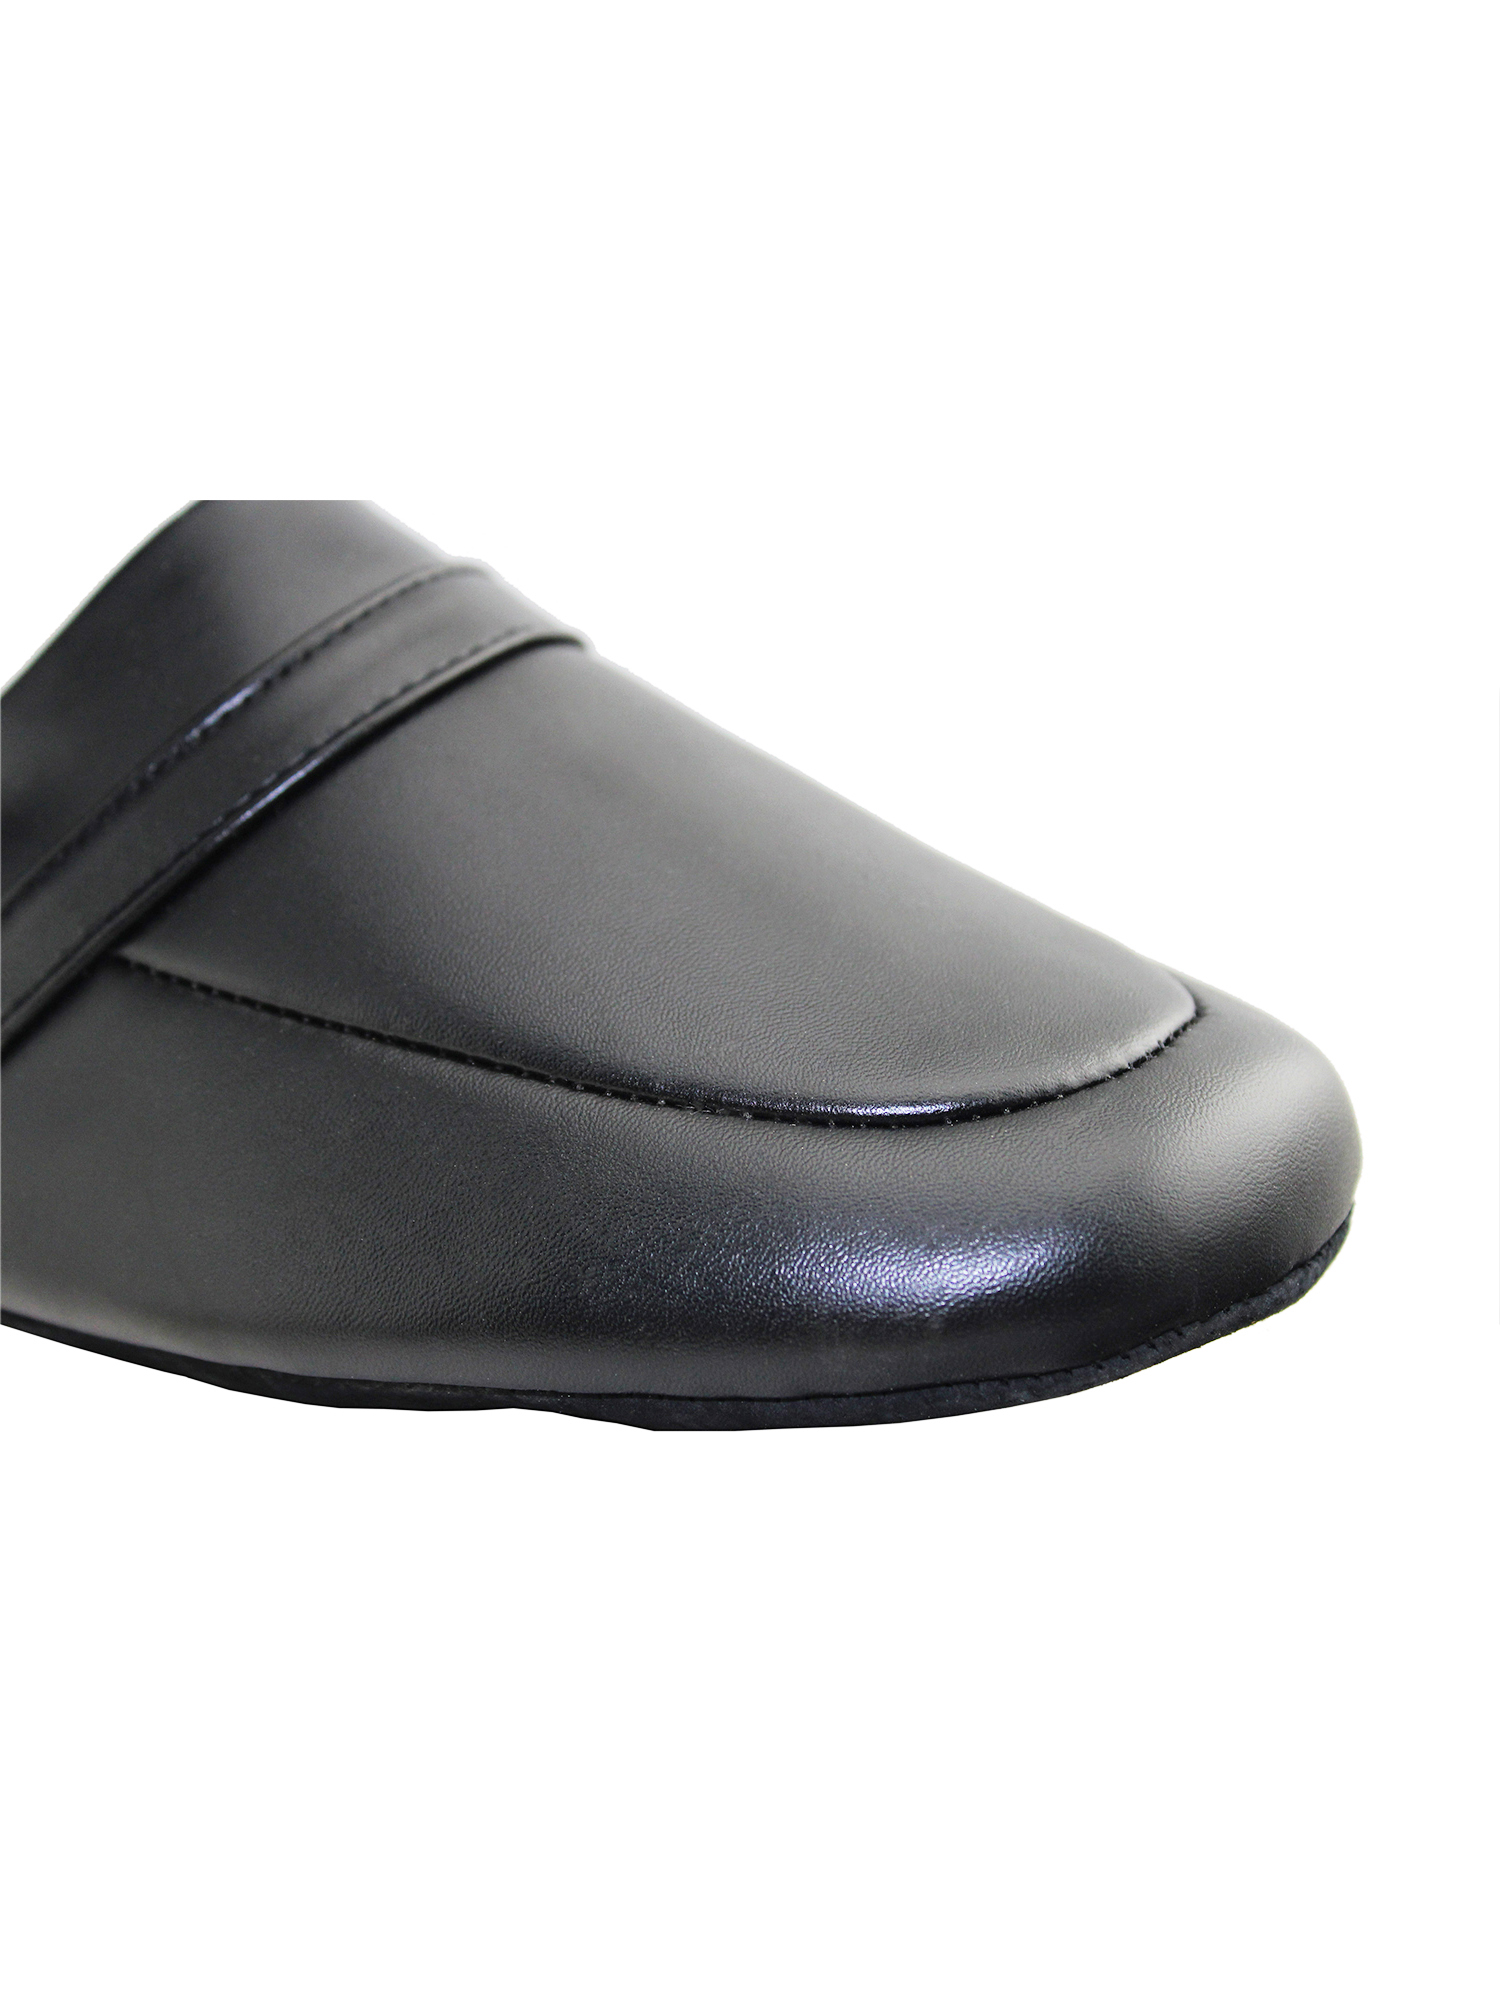 Mens Leather Slippers Open Back Slides for Men Comfortable Indoor Home Shoes - image 2 of 6